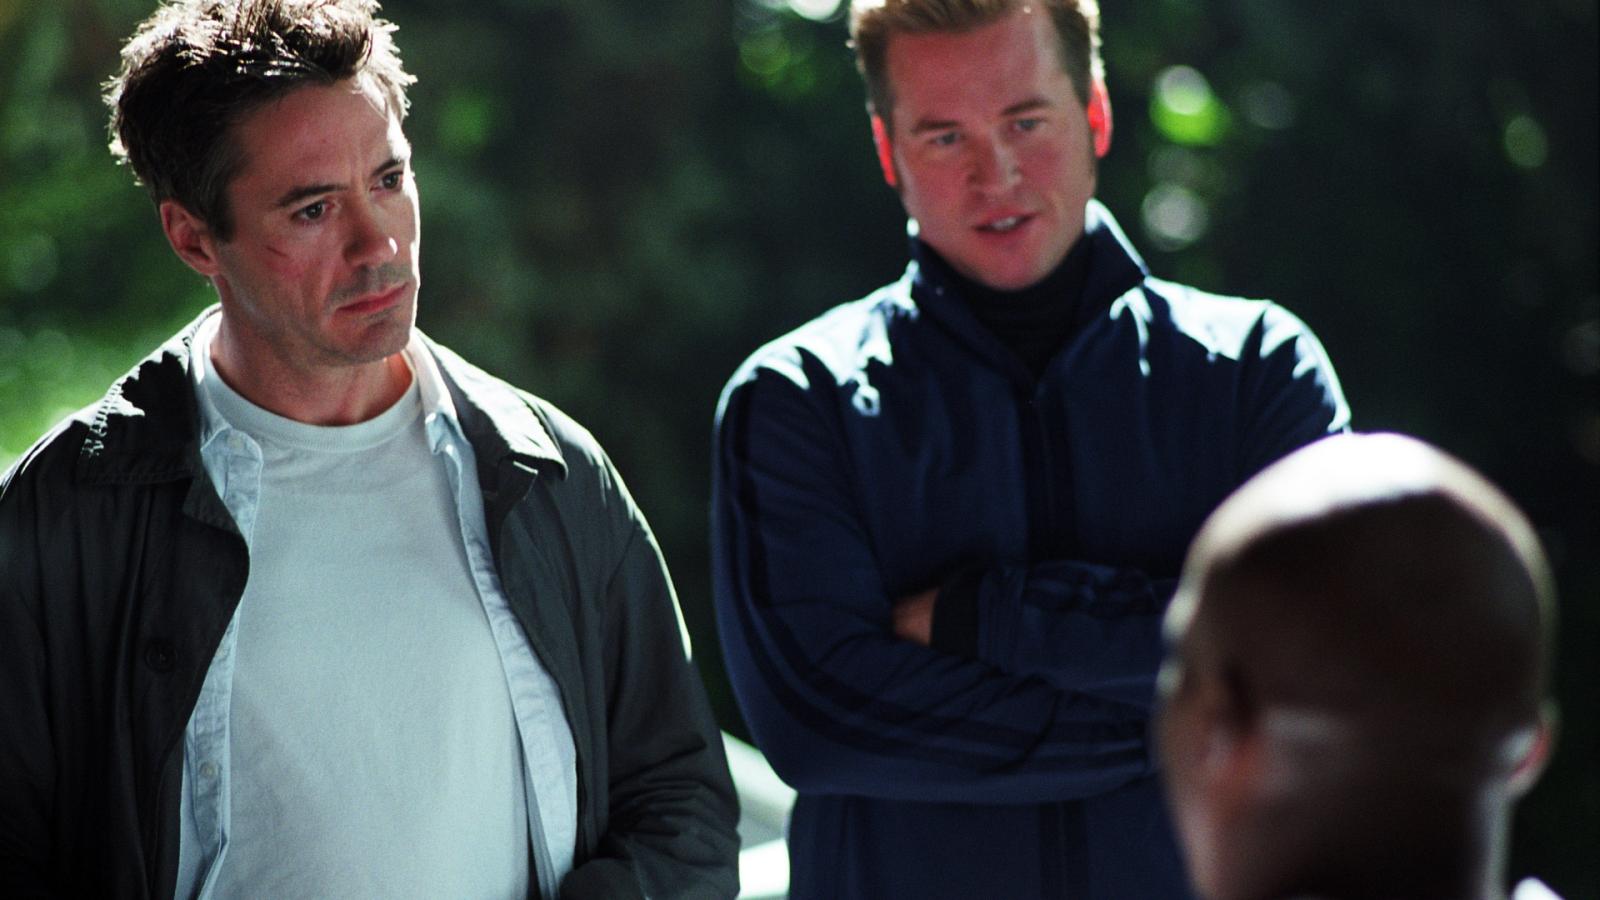 10 Buddy Cop Movies That Totally Nailed the Formula (and 5 That Didn't) - image 8